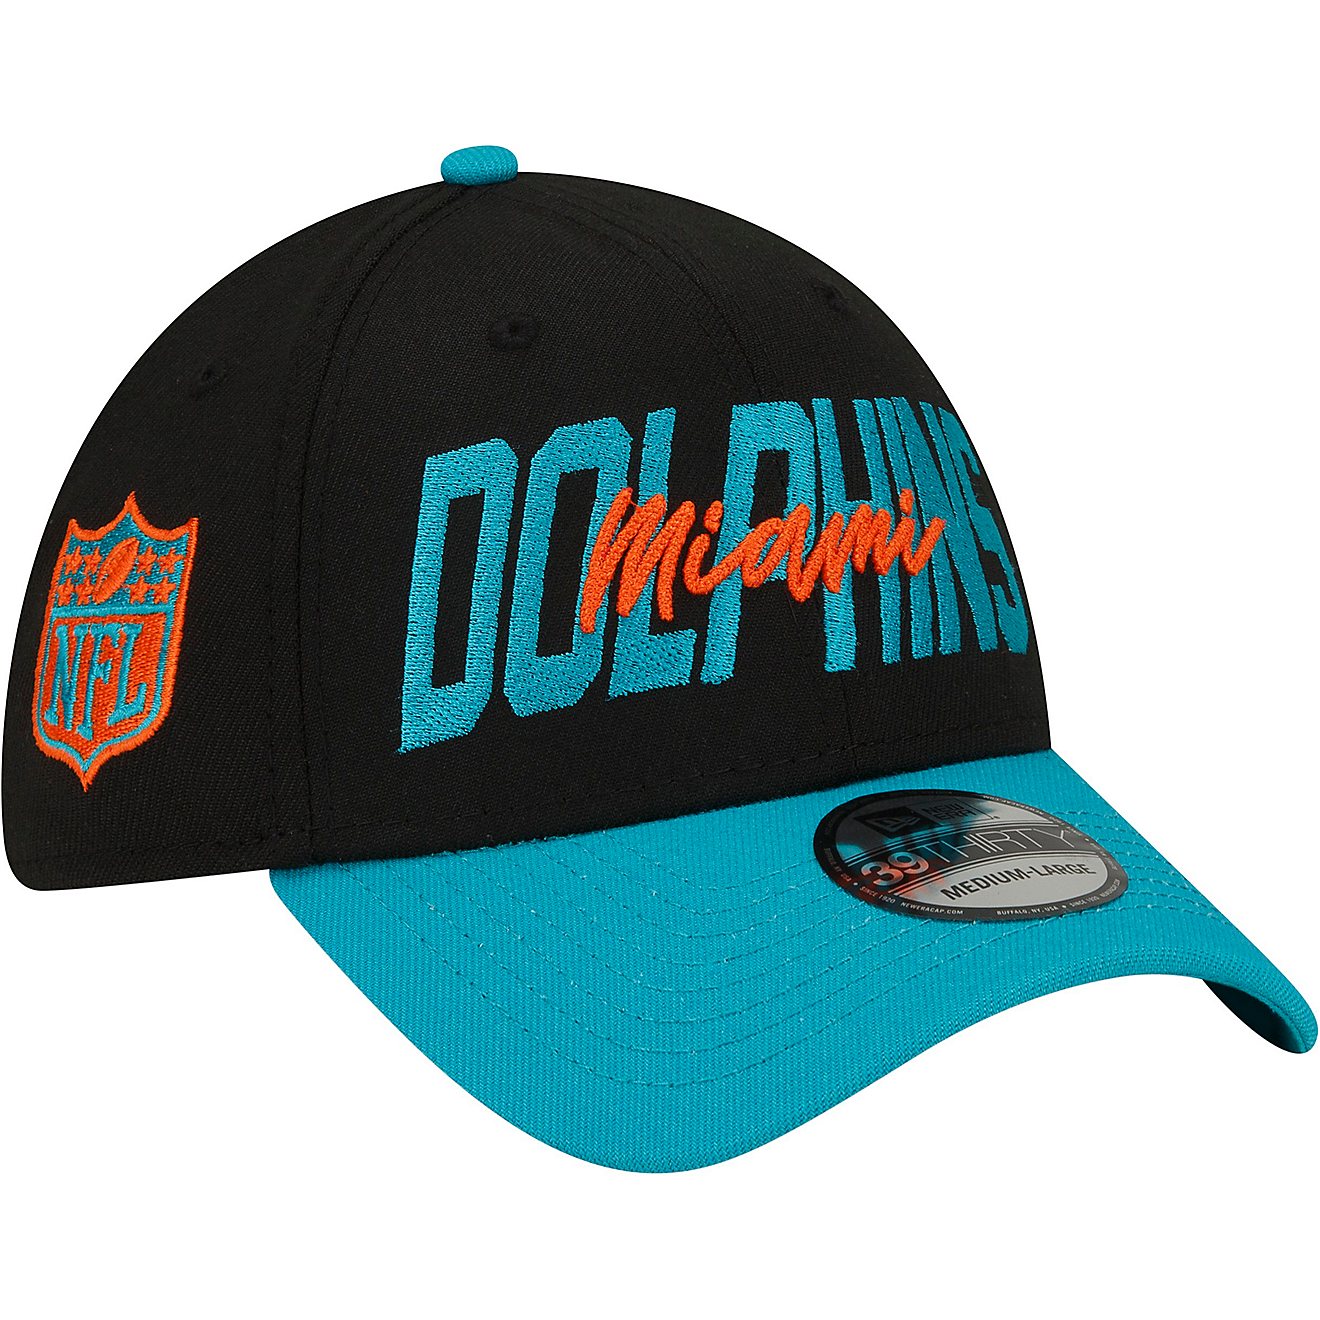 New Era Men's Miami Dolphins NFL Draft 22 39THIRTY Cap                                                                           - view number 3